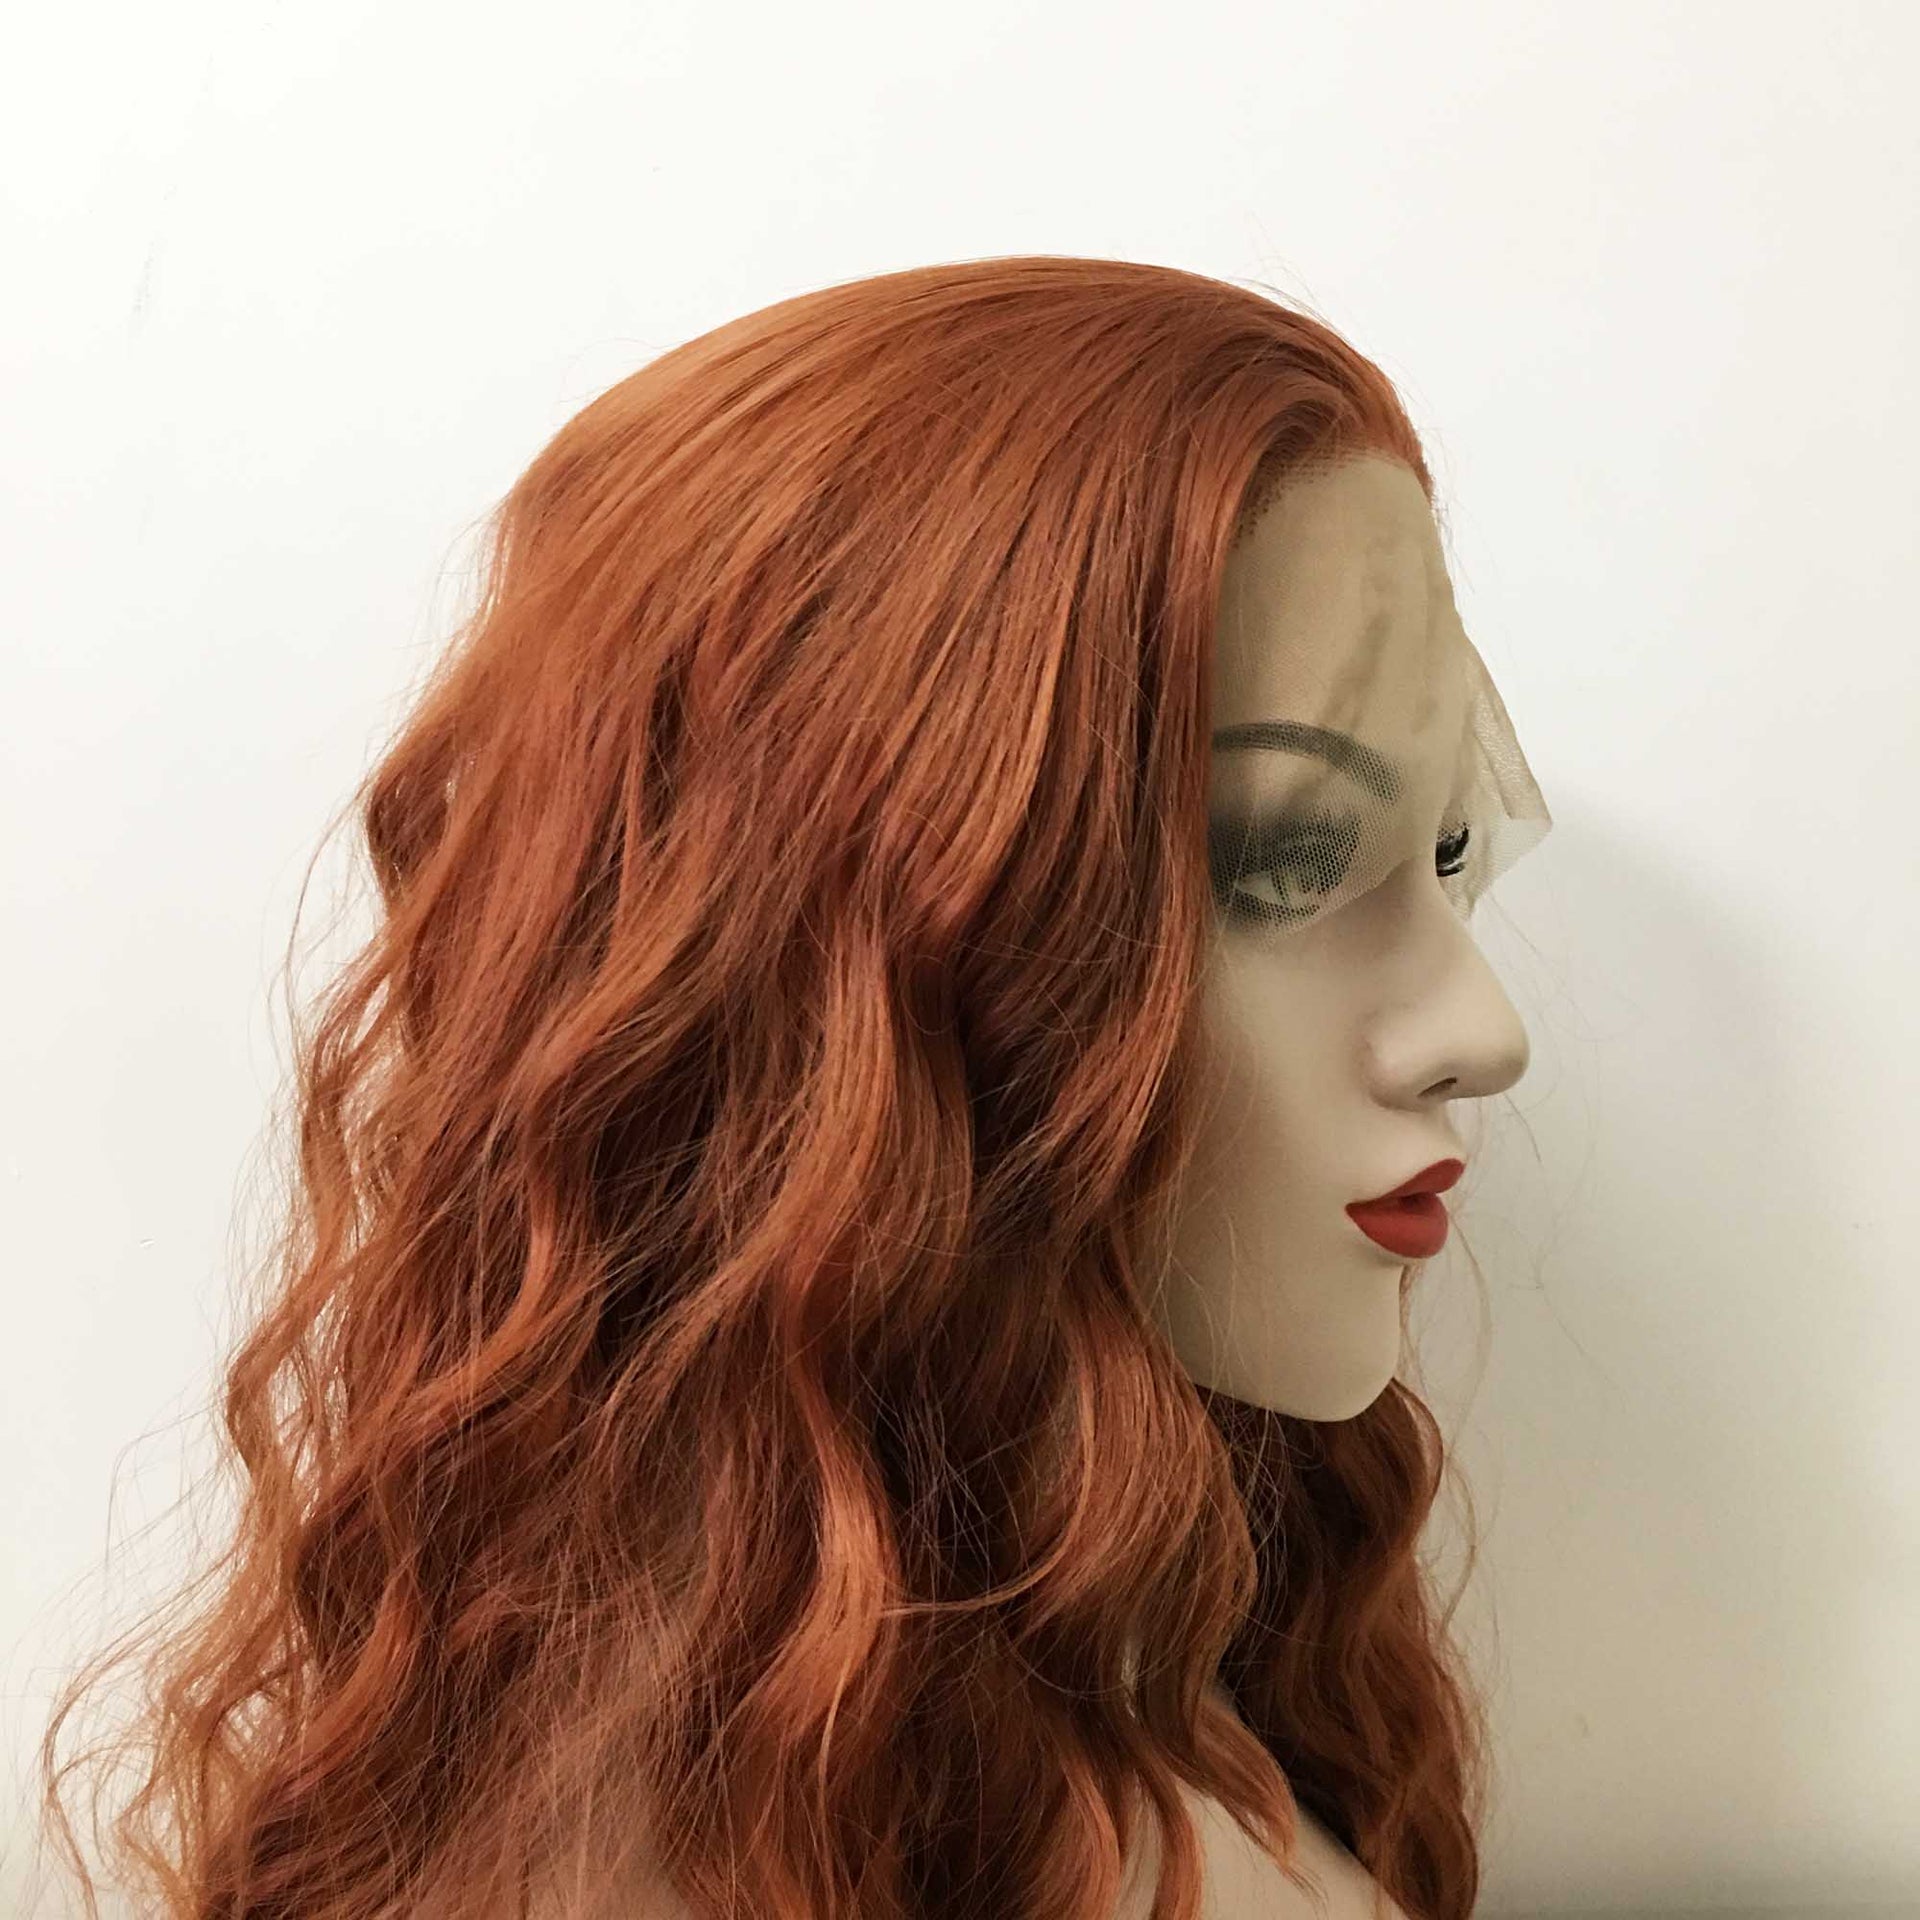 nevermindyrhead Women Auburn Ginger Red Lace Front Long Curly Free Part Wig